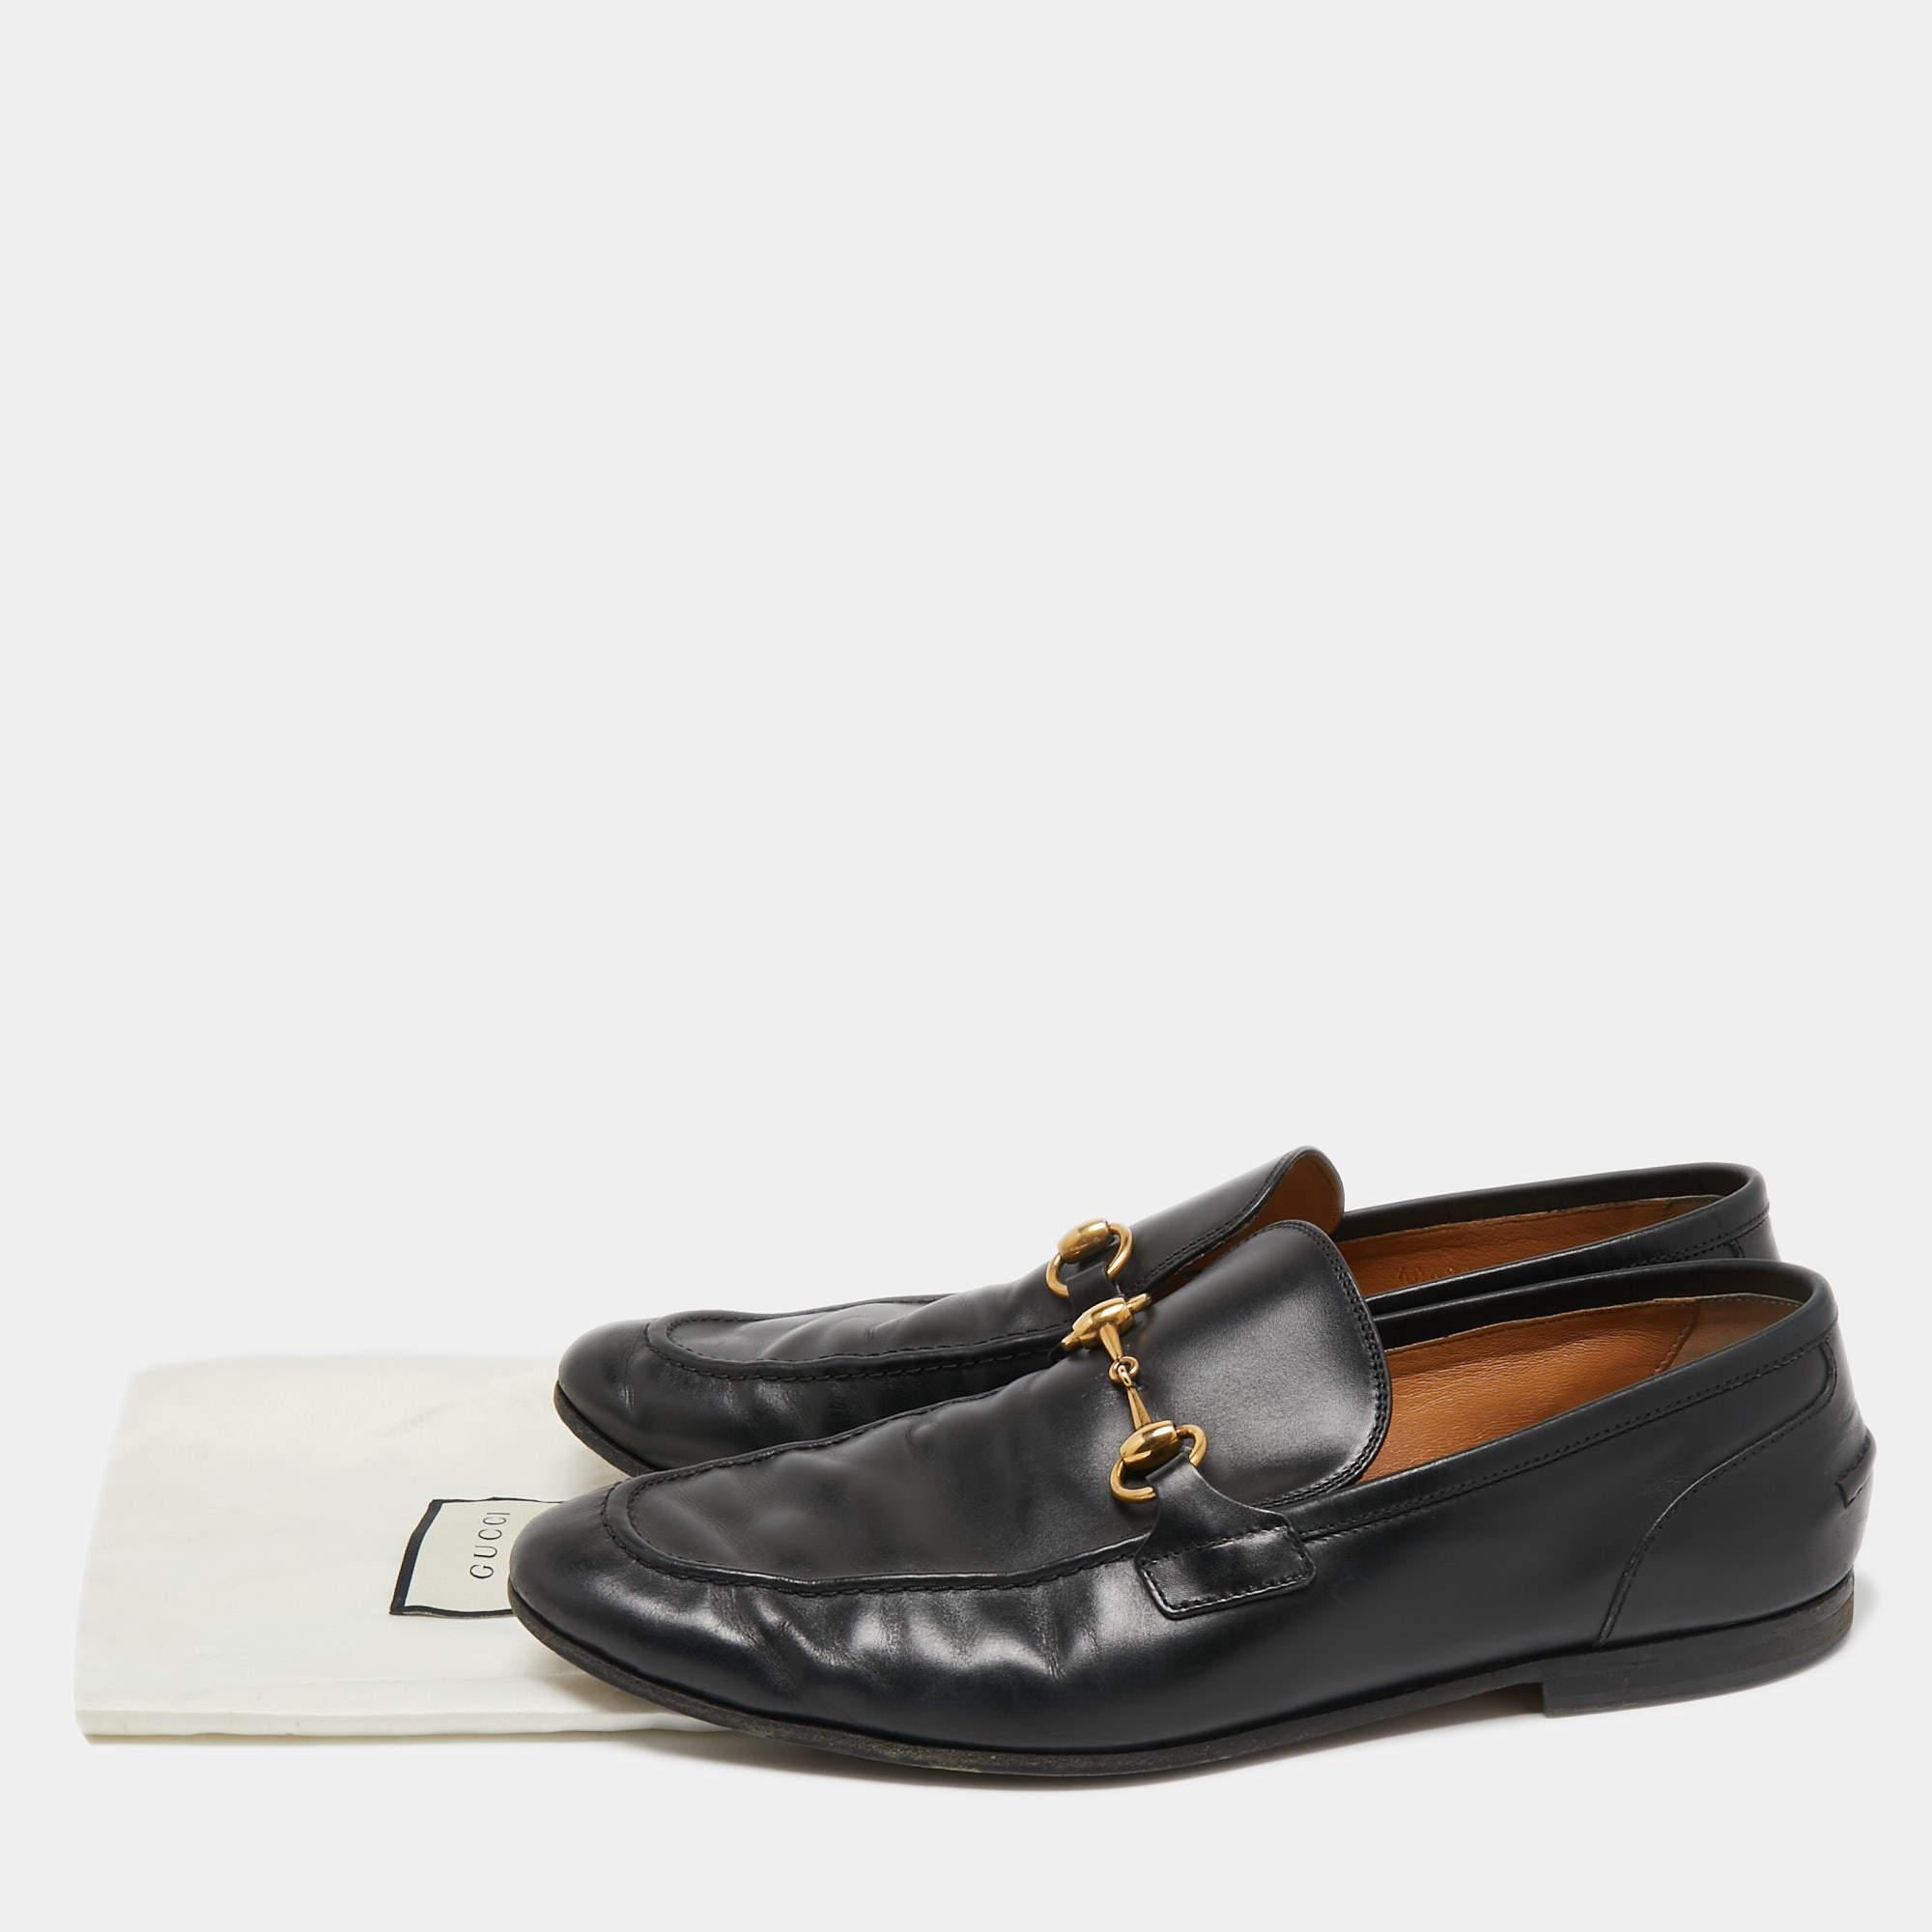 Gucci Black Leather Jordaan Loafers Size 43 2